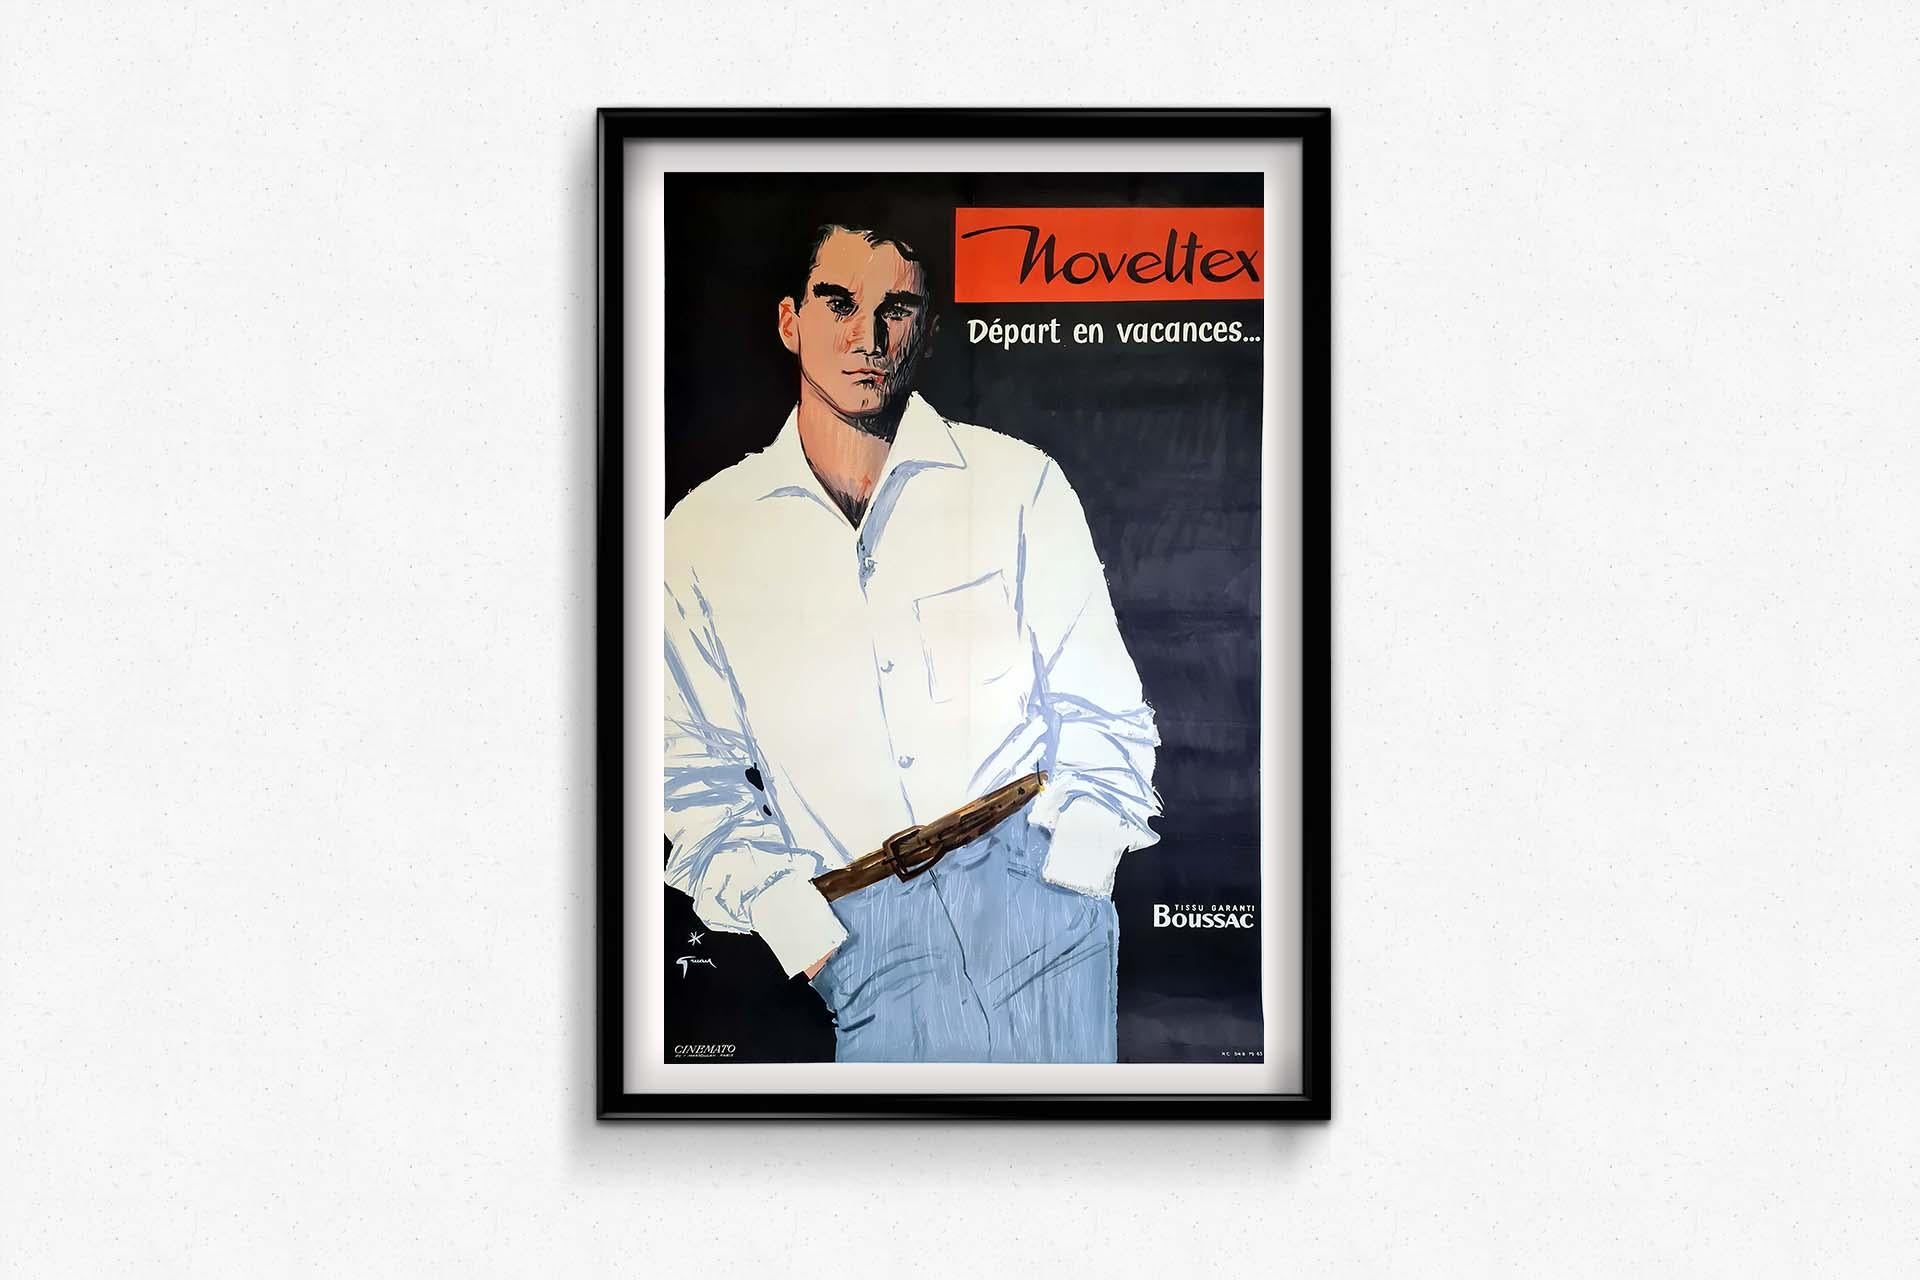 Crafted in 1954 by the esteemed French illustrator and poster artist René Gruau, the original advertising poster for Noveltex captures the essence of leisure and style with its distinctive flair. Renowned for his elegant and sophisticated designs,